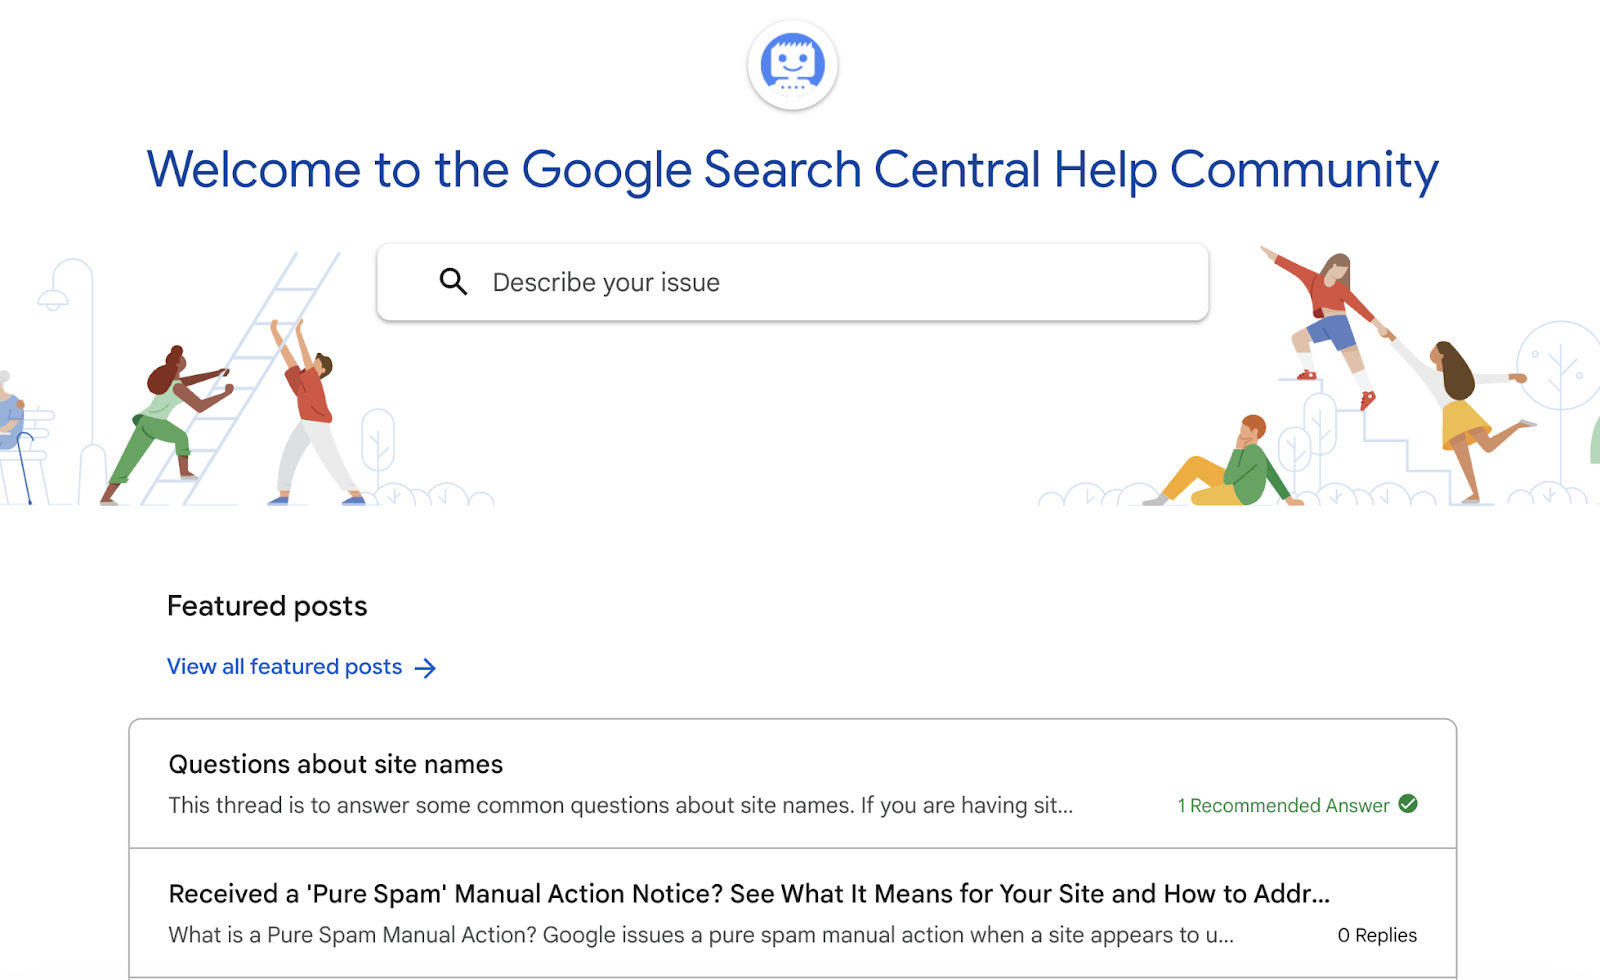 Google Search Central Help Community homepage with search bar and featured posts.